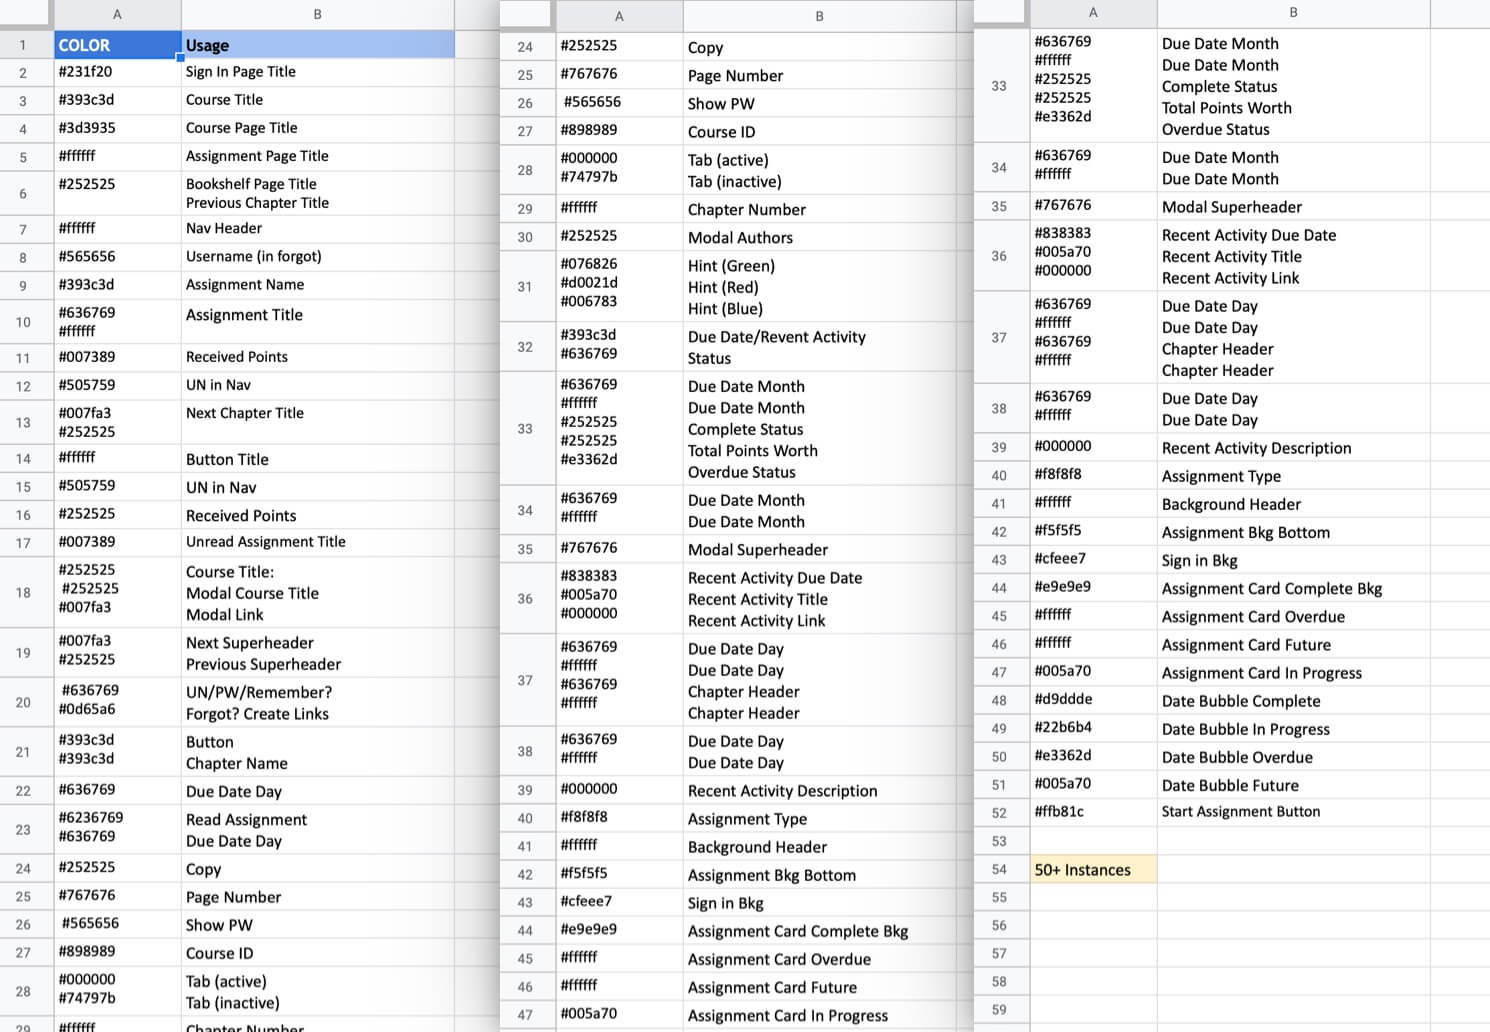 Spreadsheets collecting the variety of styles in use before the design system.